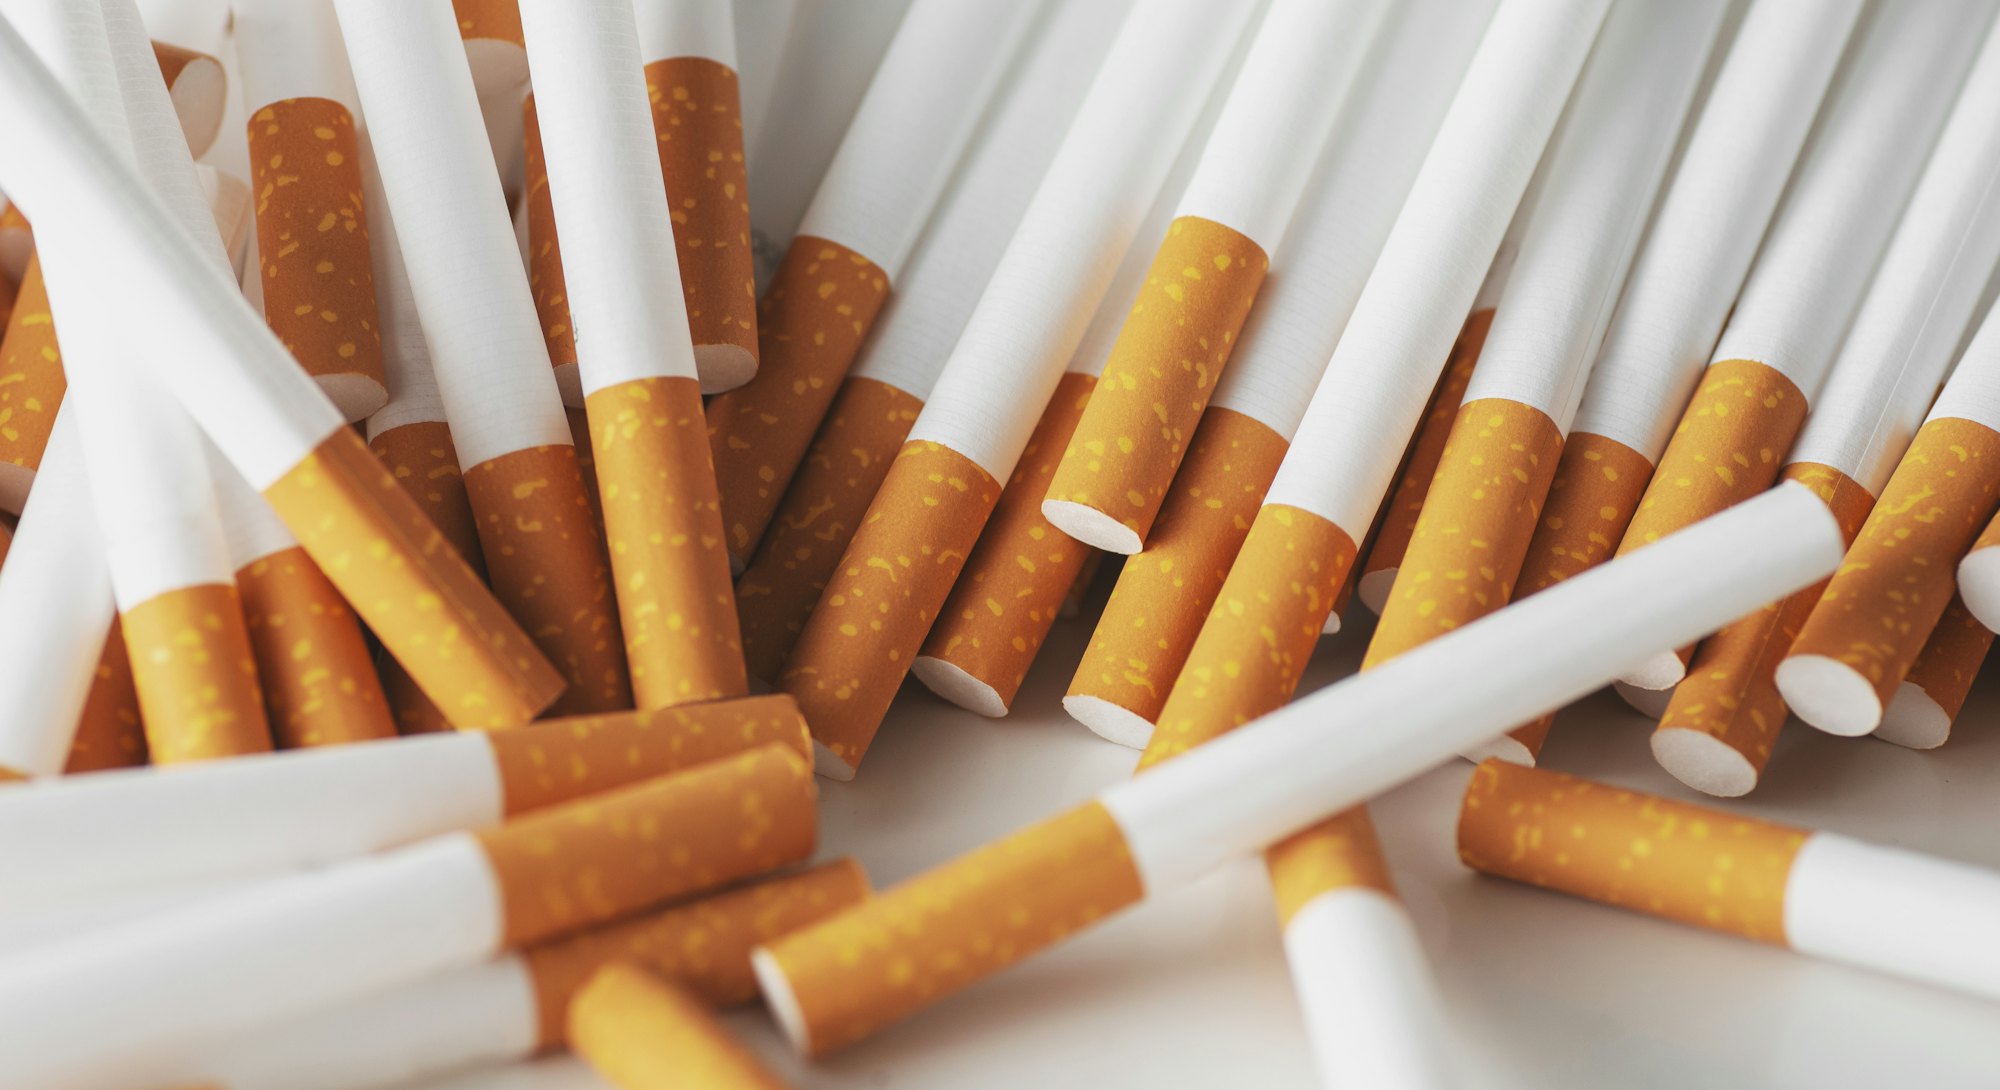 Close up of a smoking cigarettes . cigarette filter tubes